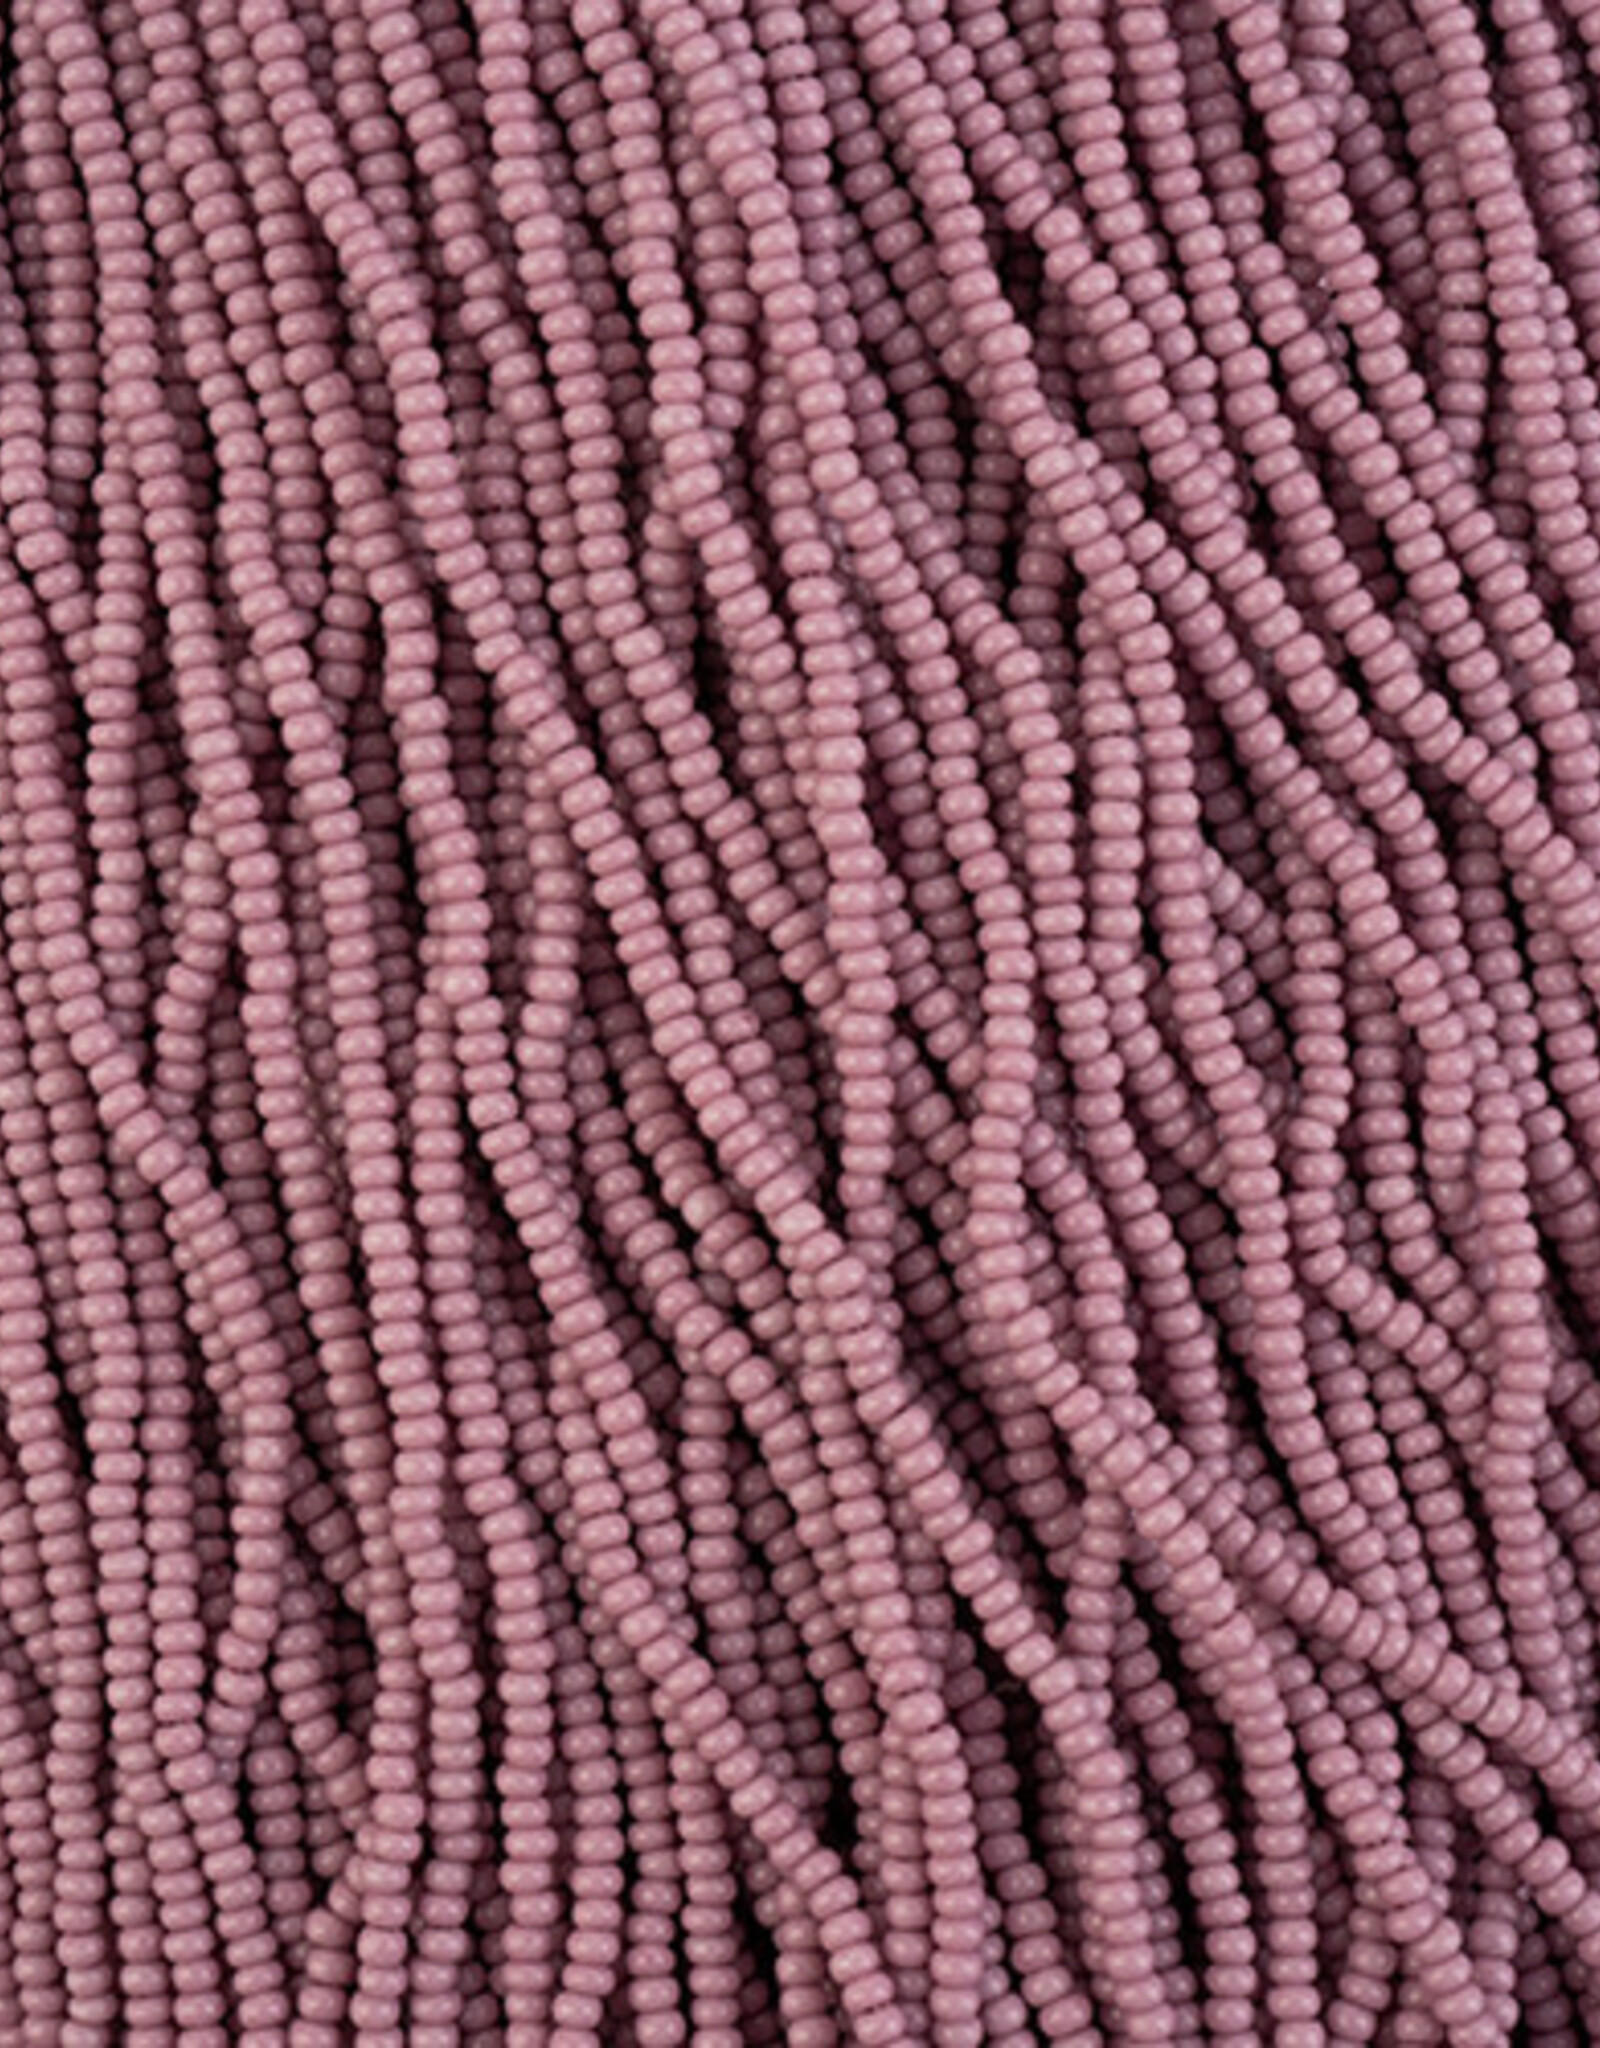 Seed Beads 11/0 Plum Chalk Dyed Solgel Strung 43240